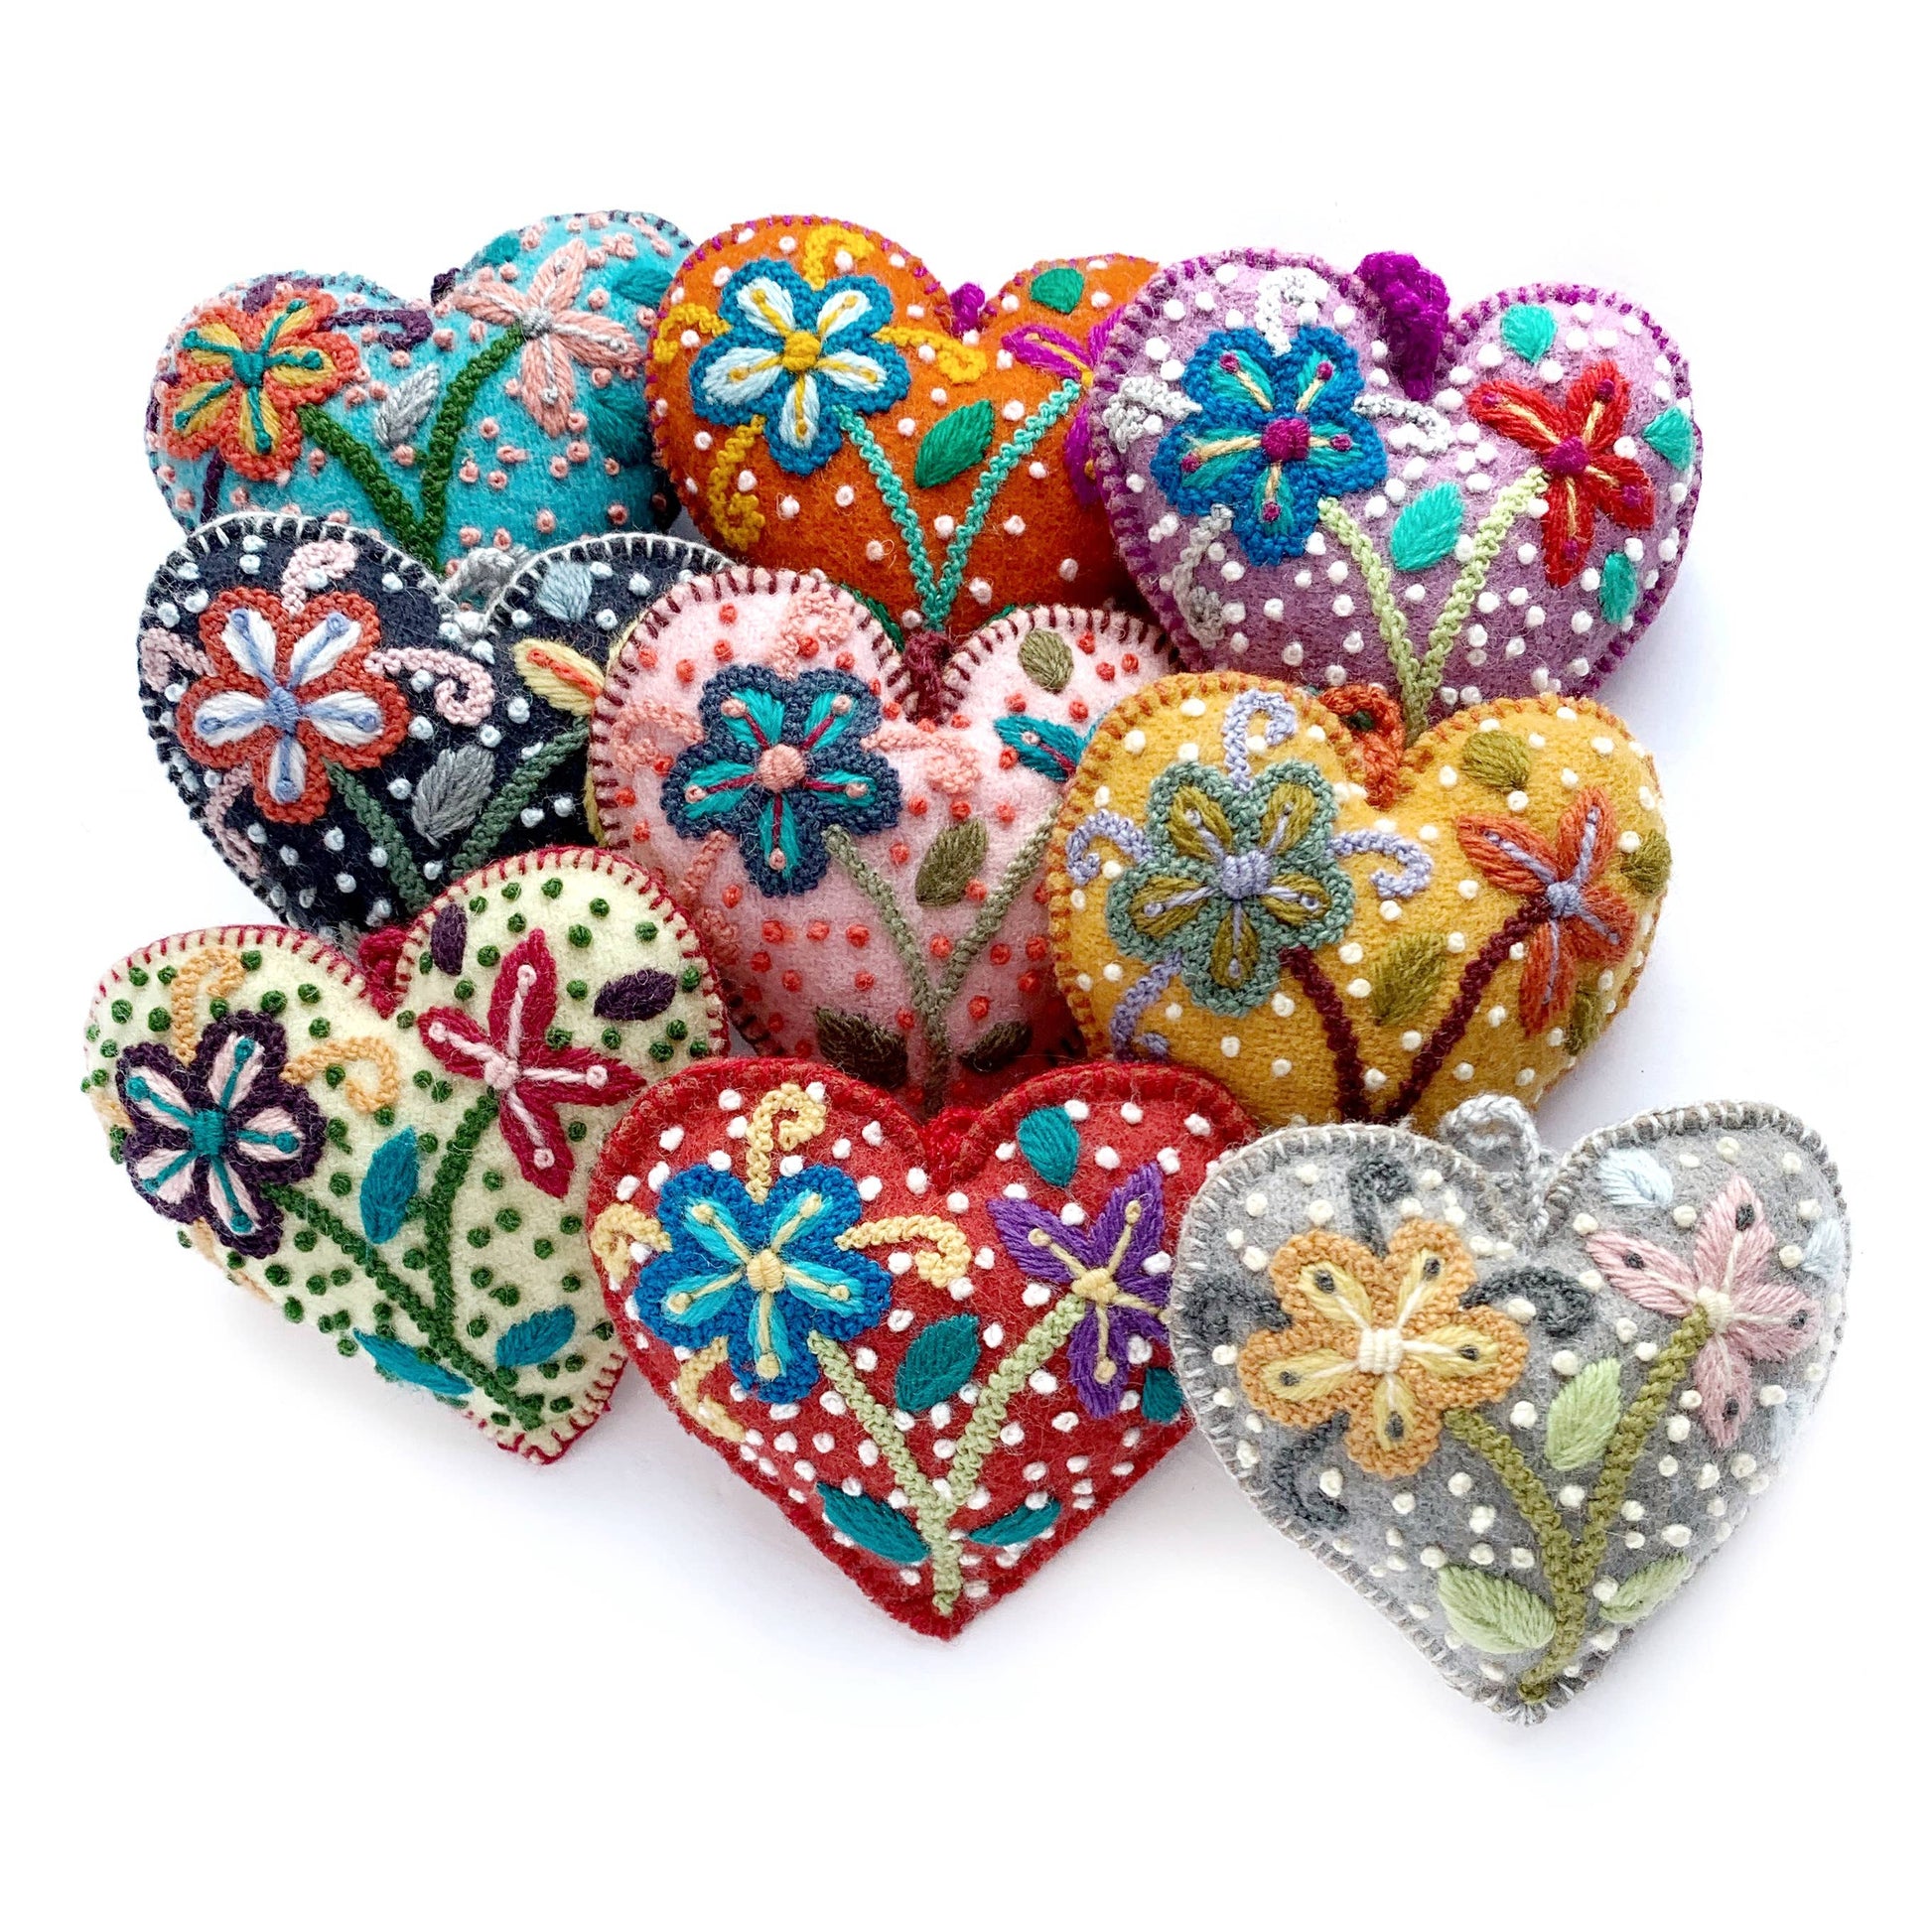 Set of 6 Handmade Ceramic Heart Ornaments in Colorful Tones, 'Flora and  Fauna Heart